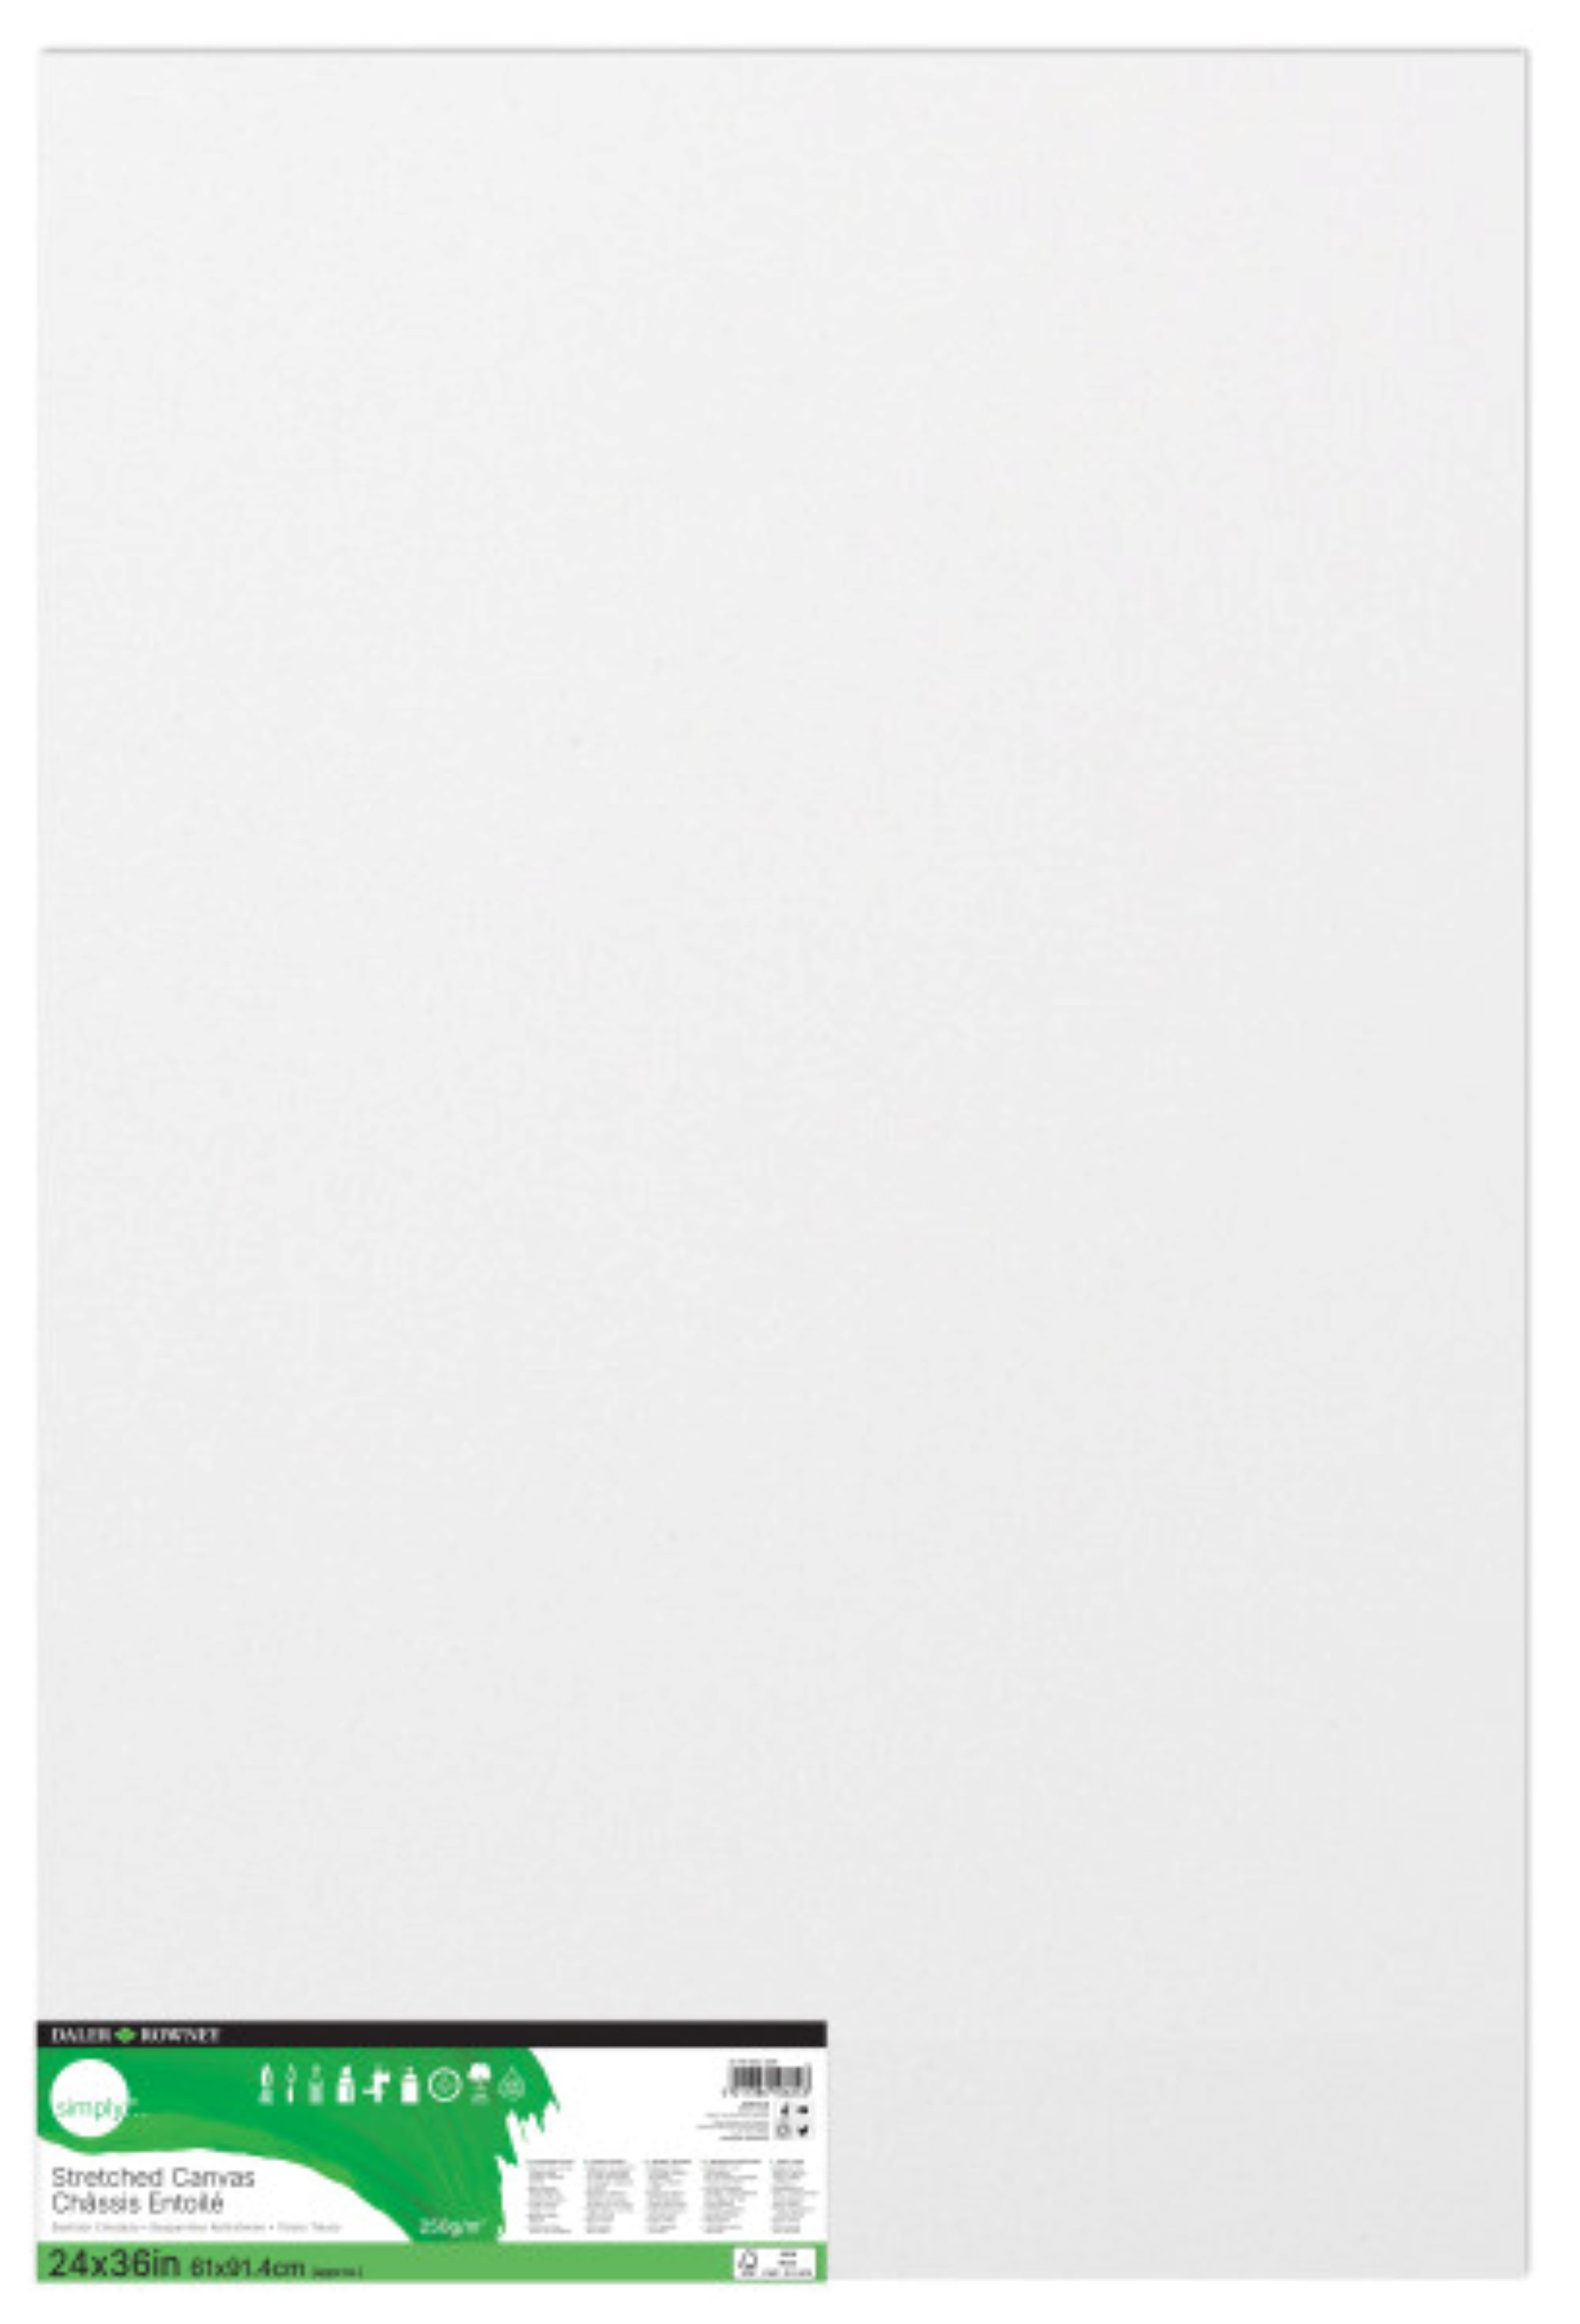 Daler-Rowney Simply Stretched Canvas, White Art Canvas, 24" x 36", 1 Ct - image 1 of 4